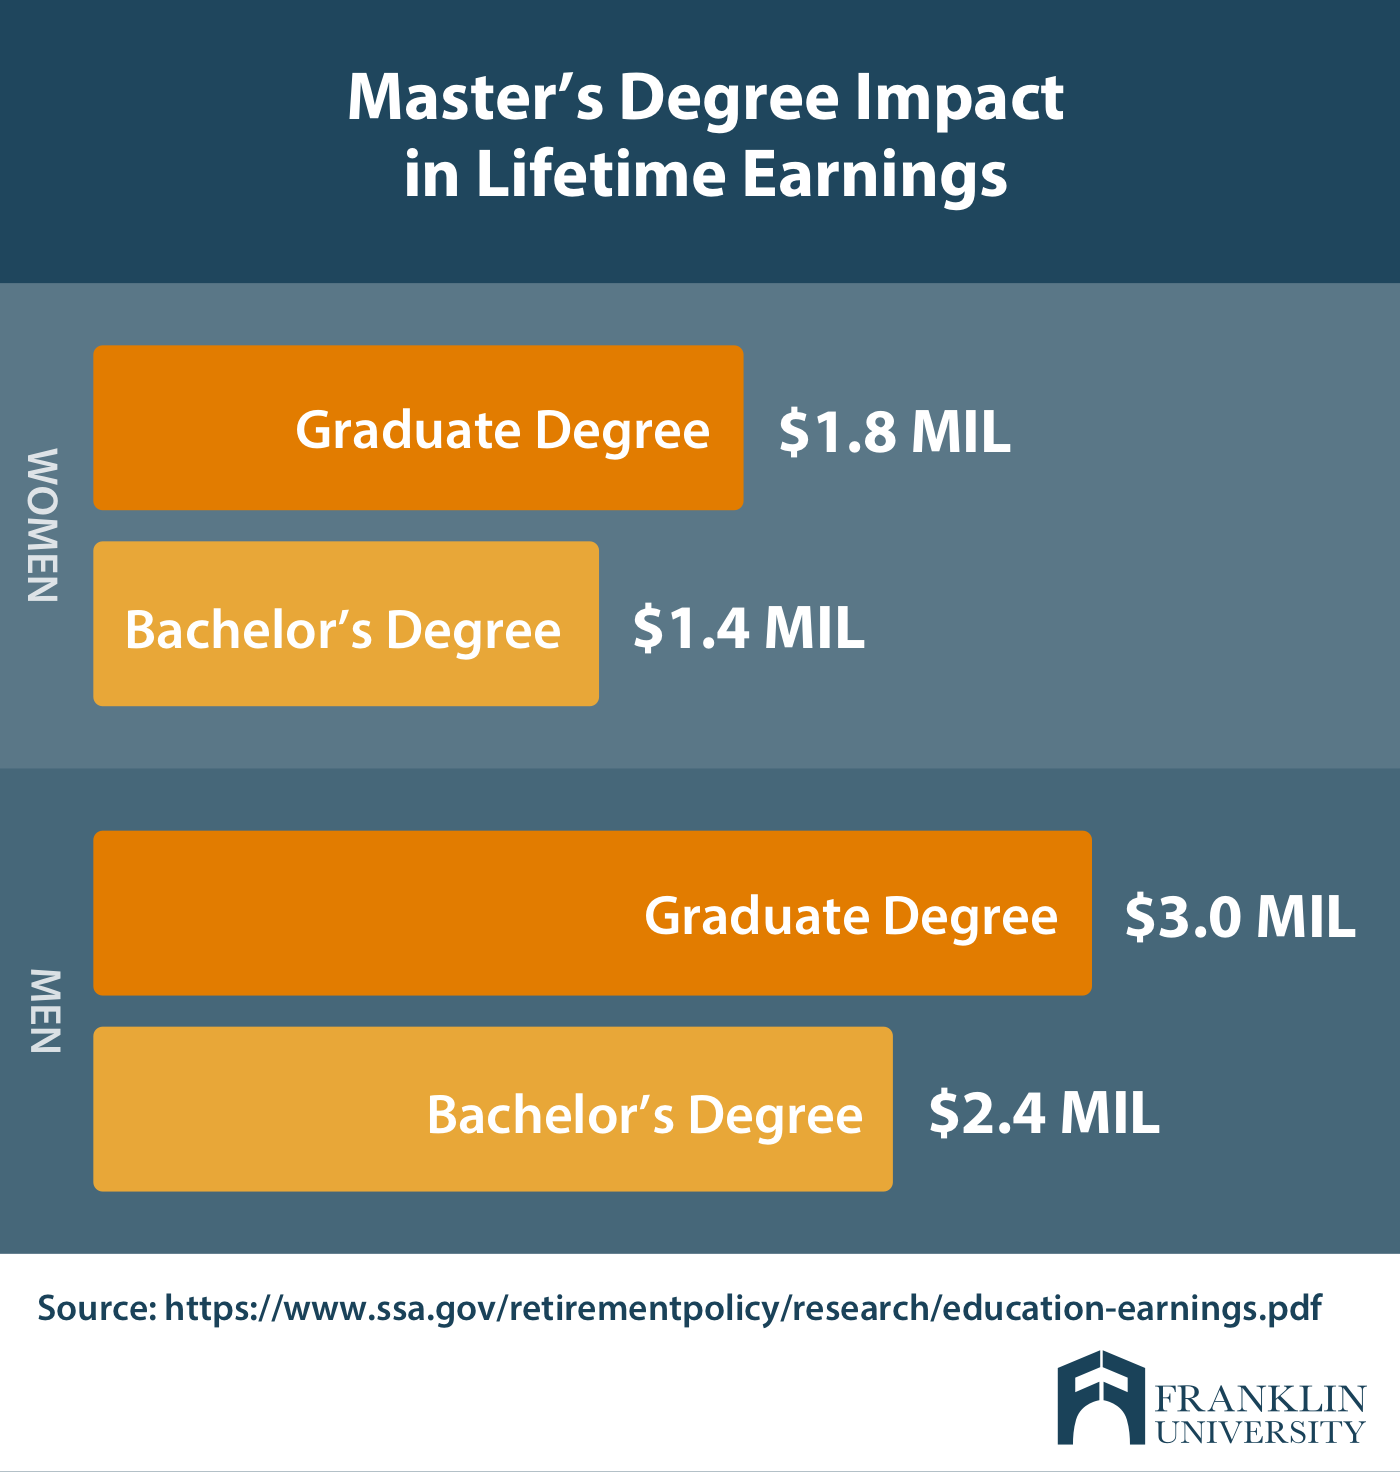 graphic describes the masters degree impact in lifetime earnings